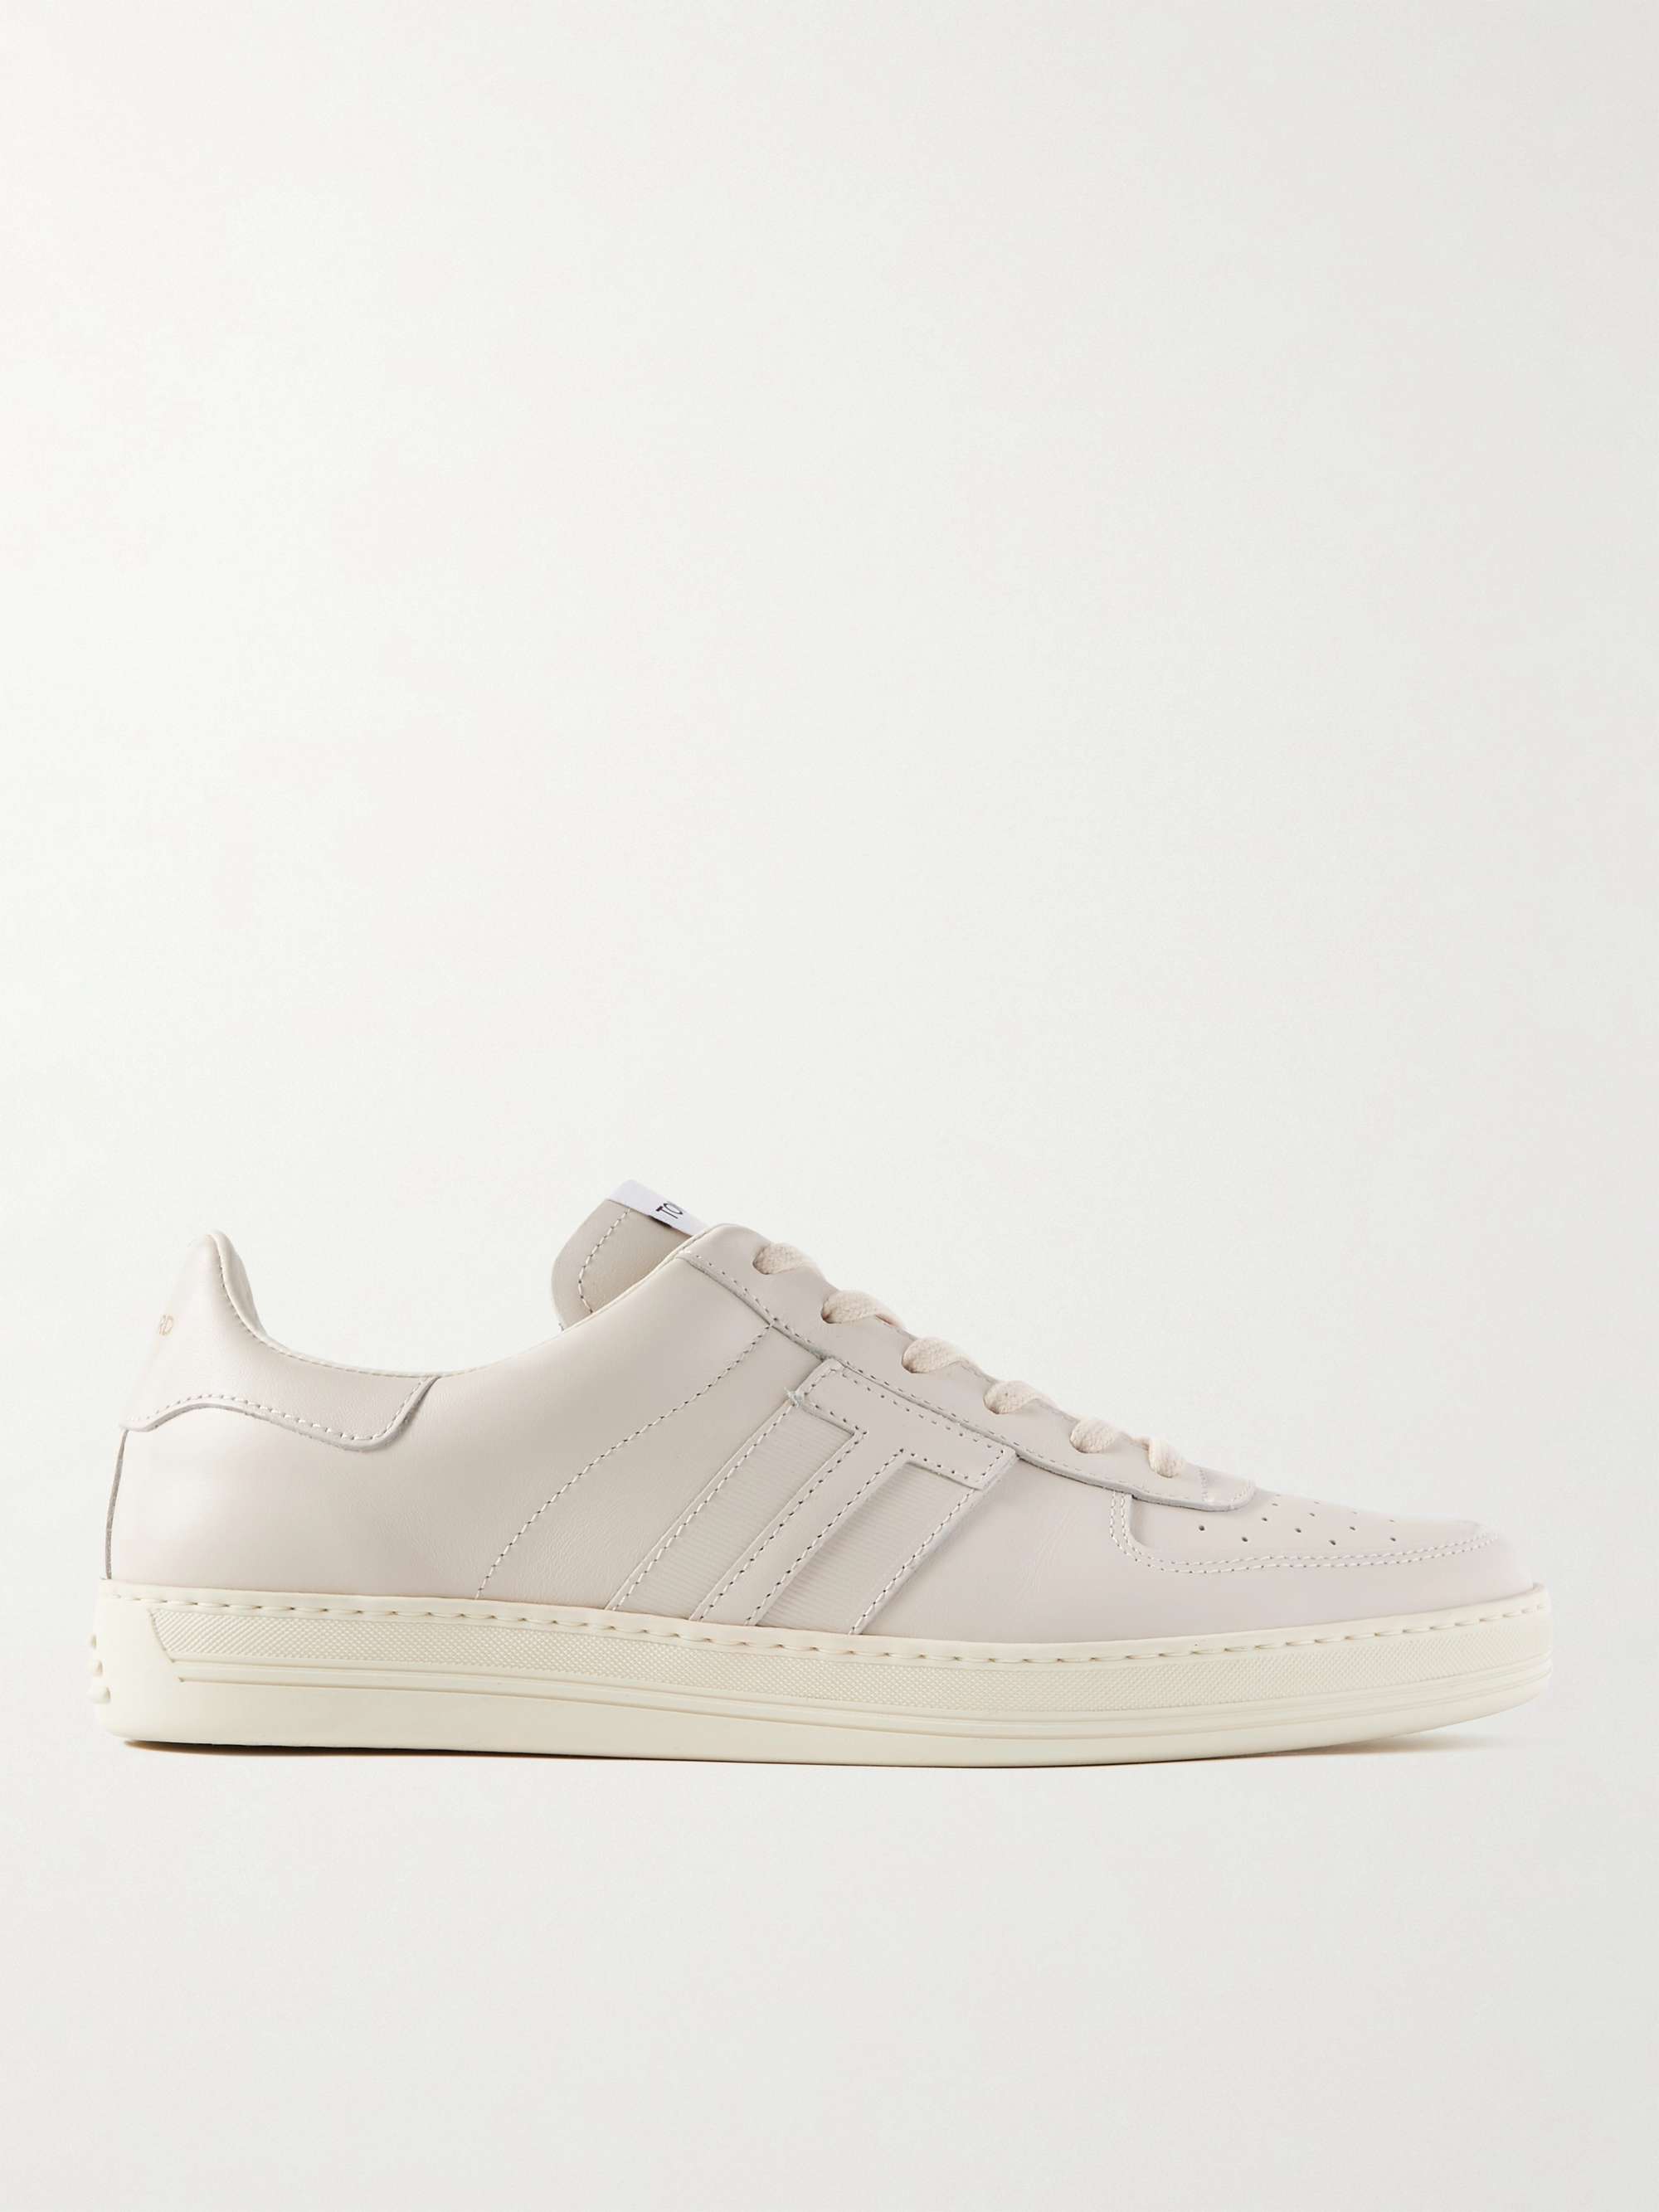 TOM FORD Radcliffe Full-Grain Leather Sneakers